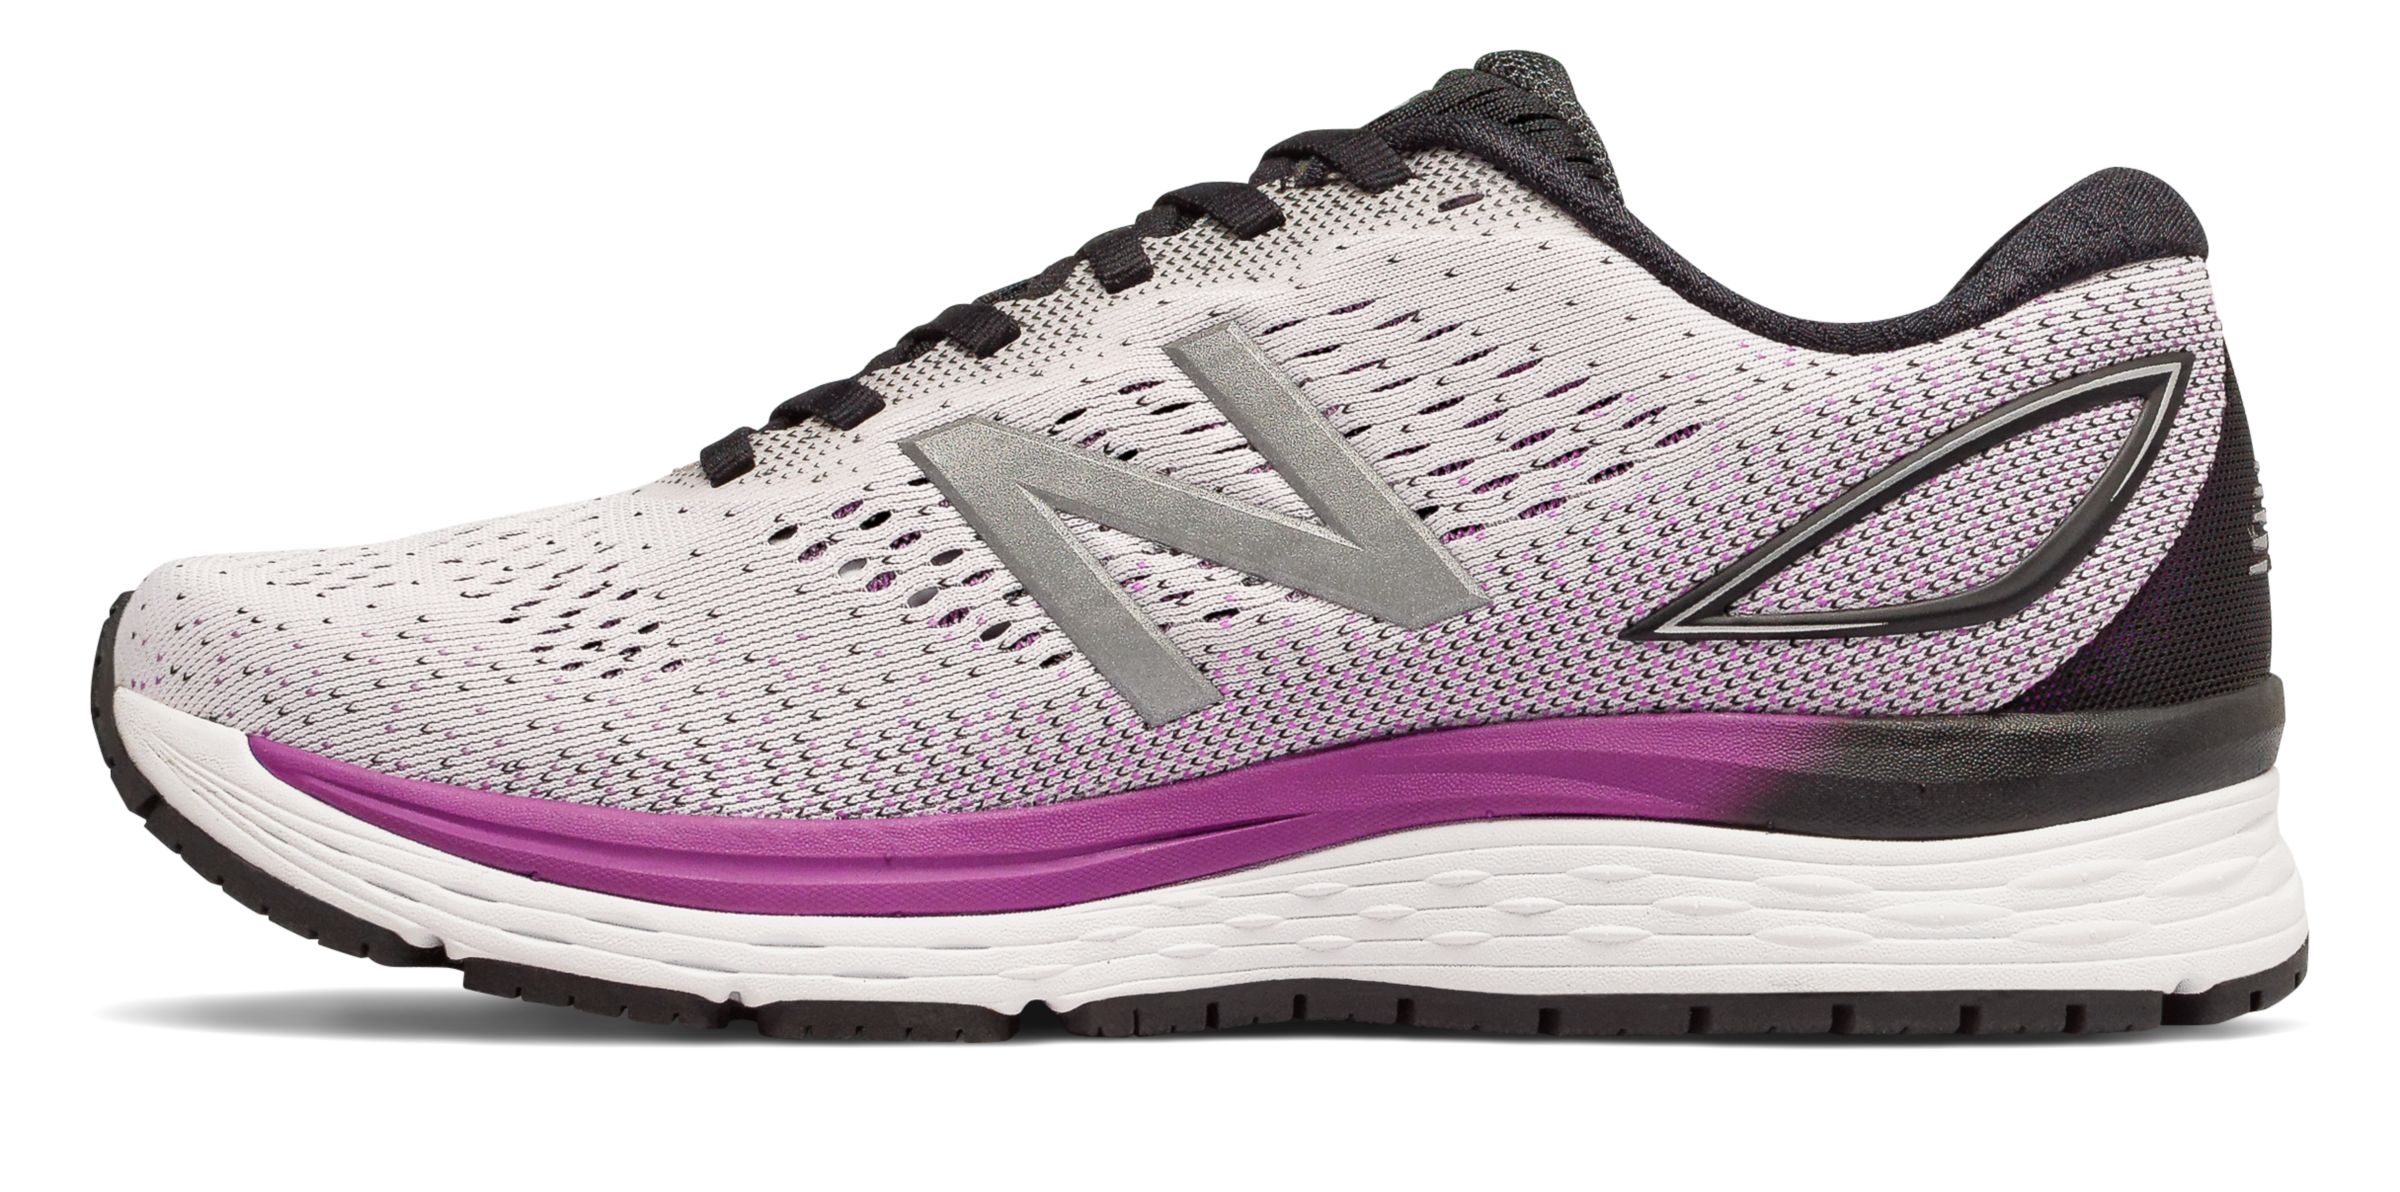 New Balance W880-V9 on Sale - Discounts Up to 64% Off on W880WT9 at Joe's New  Balance Outlet